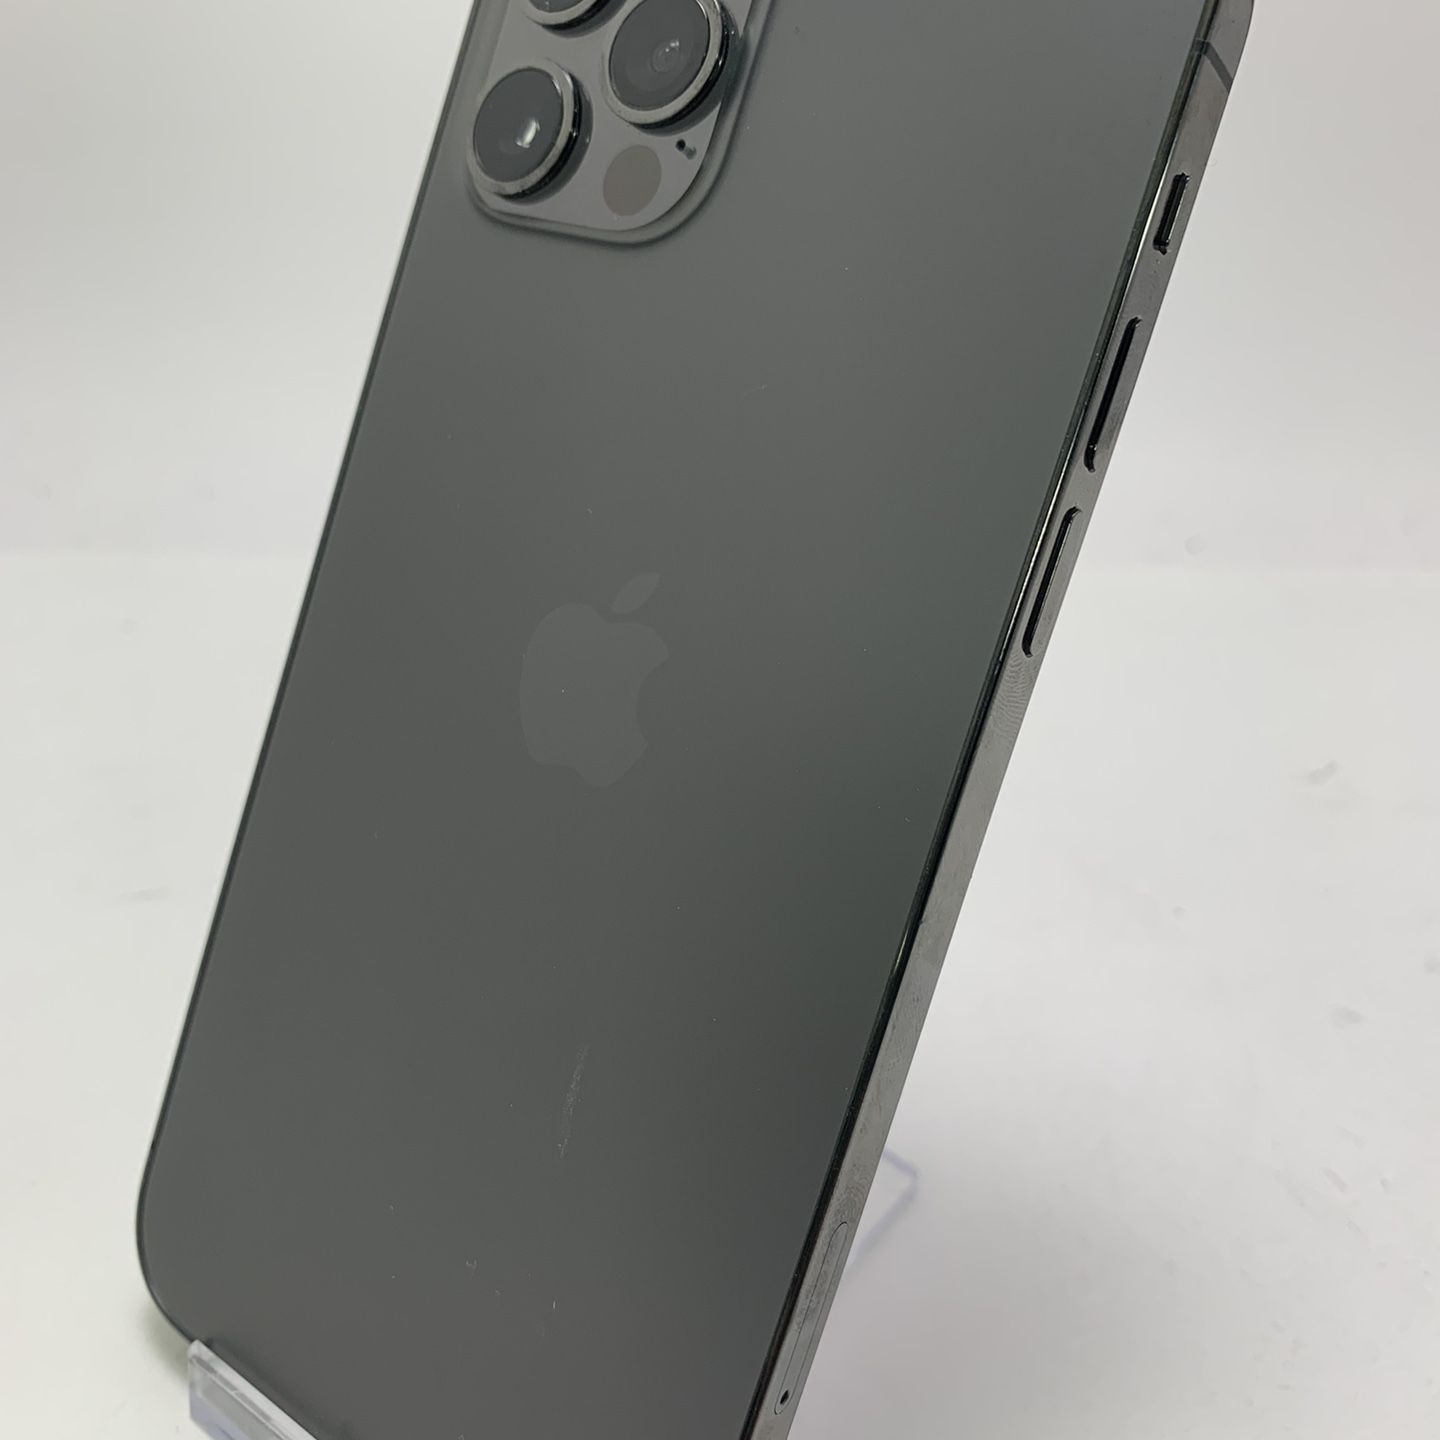 Apple iPhone 12 Pro Graphite 256GB Verizon ONLY No FACE ID With 30 Day Warranty 